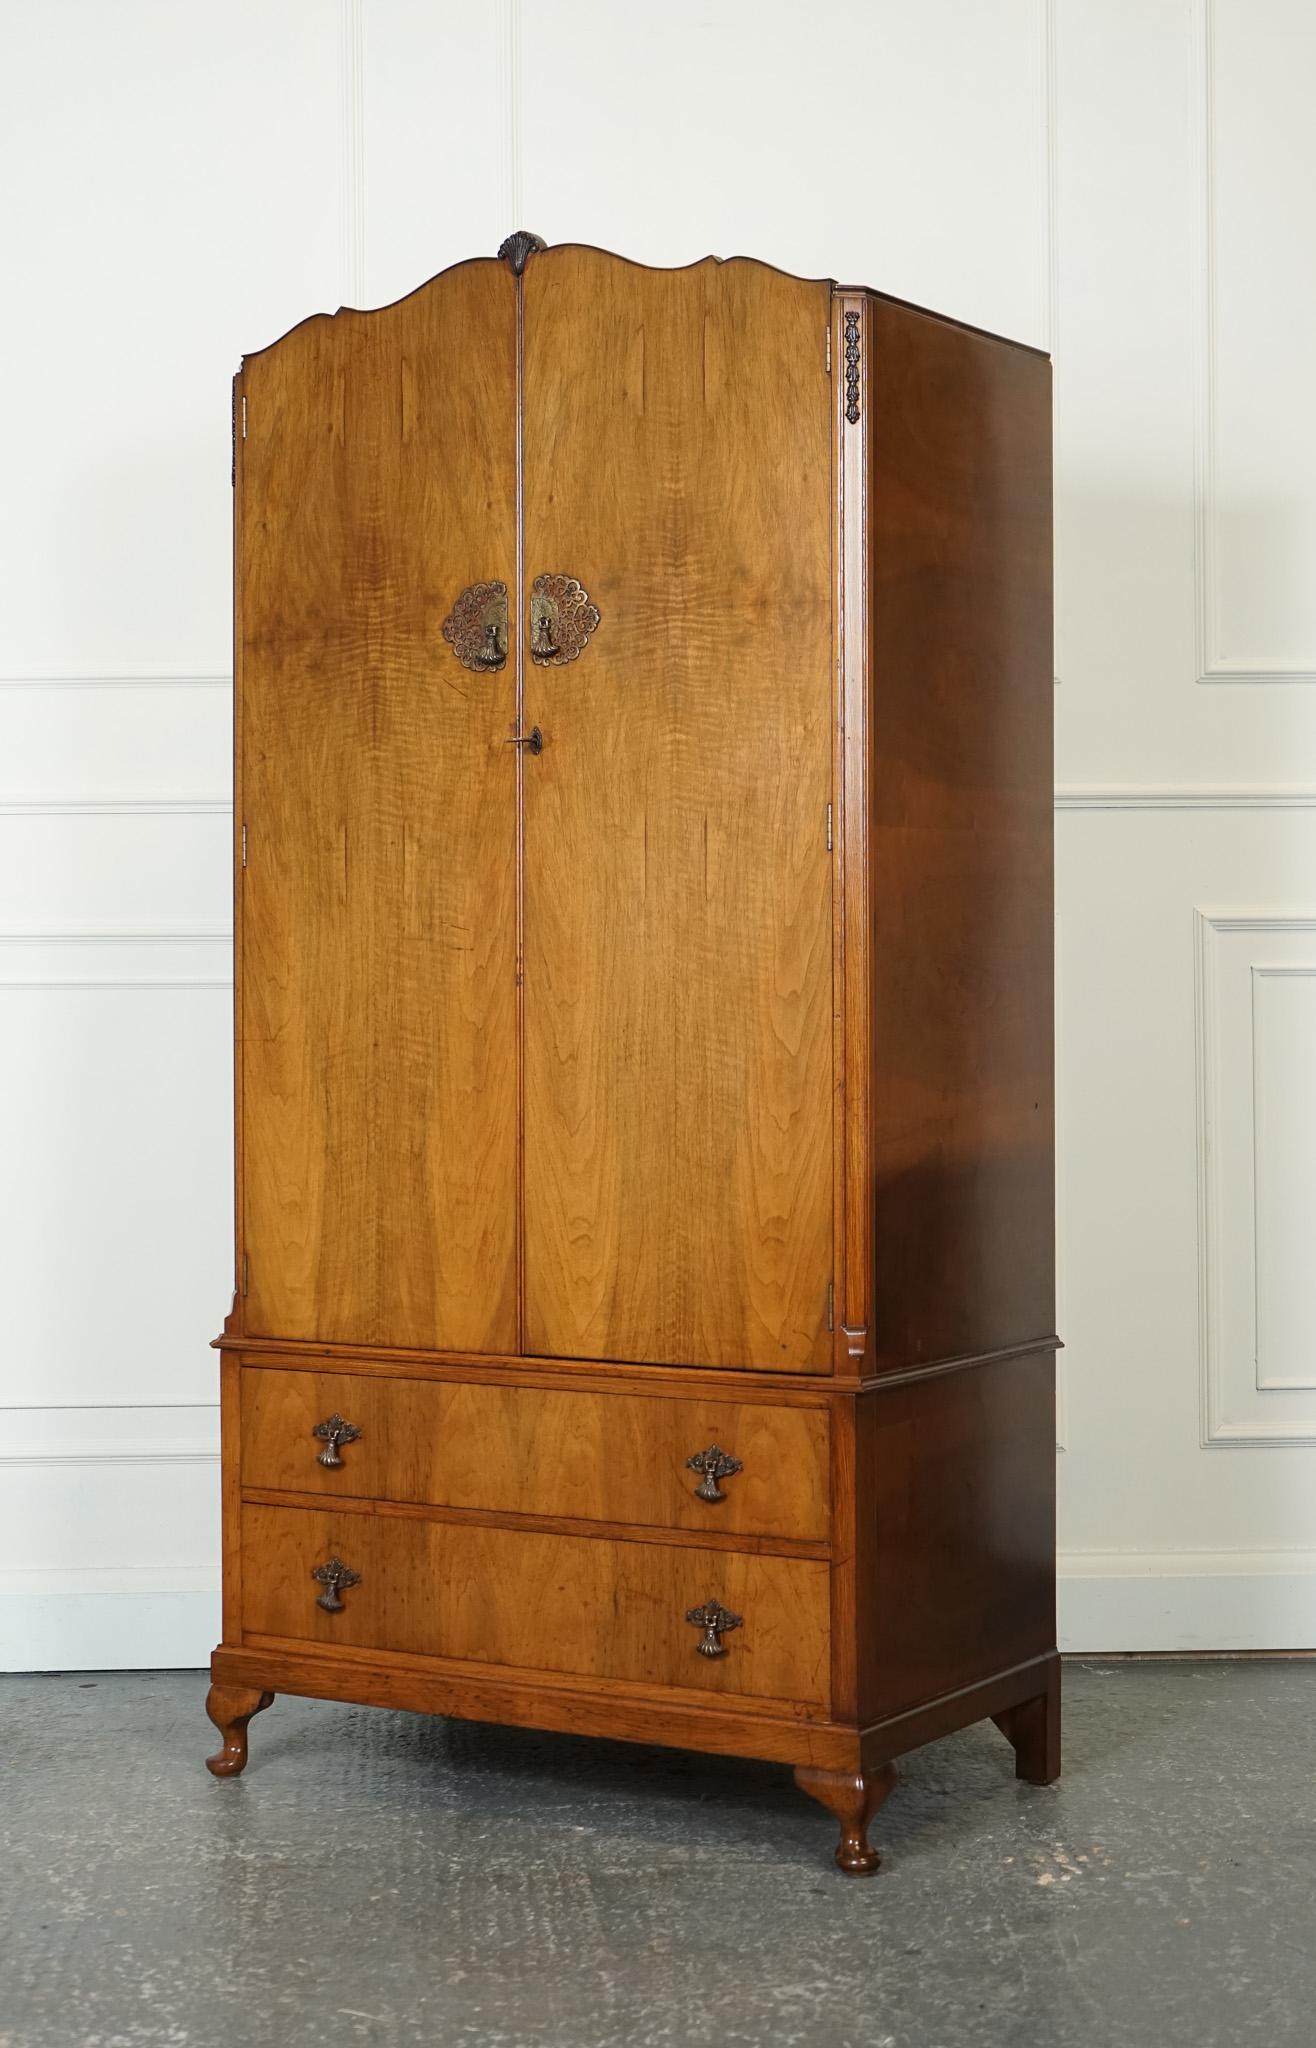 Antiques of London



We are delighted to offer for sale this Lovely Art Deco Walnut Queen Anne Legs Double Wardrobe.

A lovely Art Deco style walnut double wardrobe with Queen Anne legs is an exquisite furniture piece that adds charm and